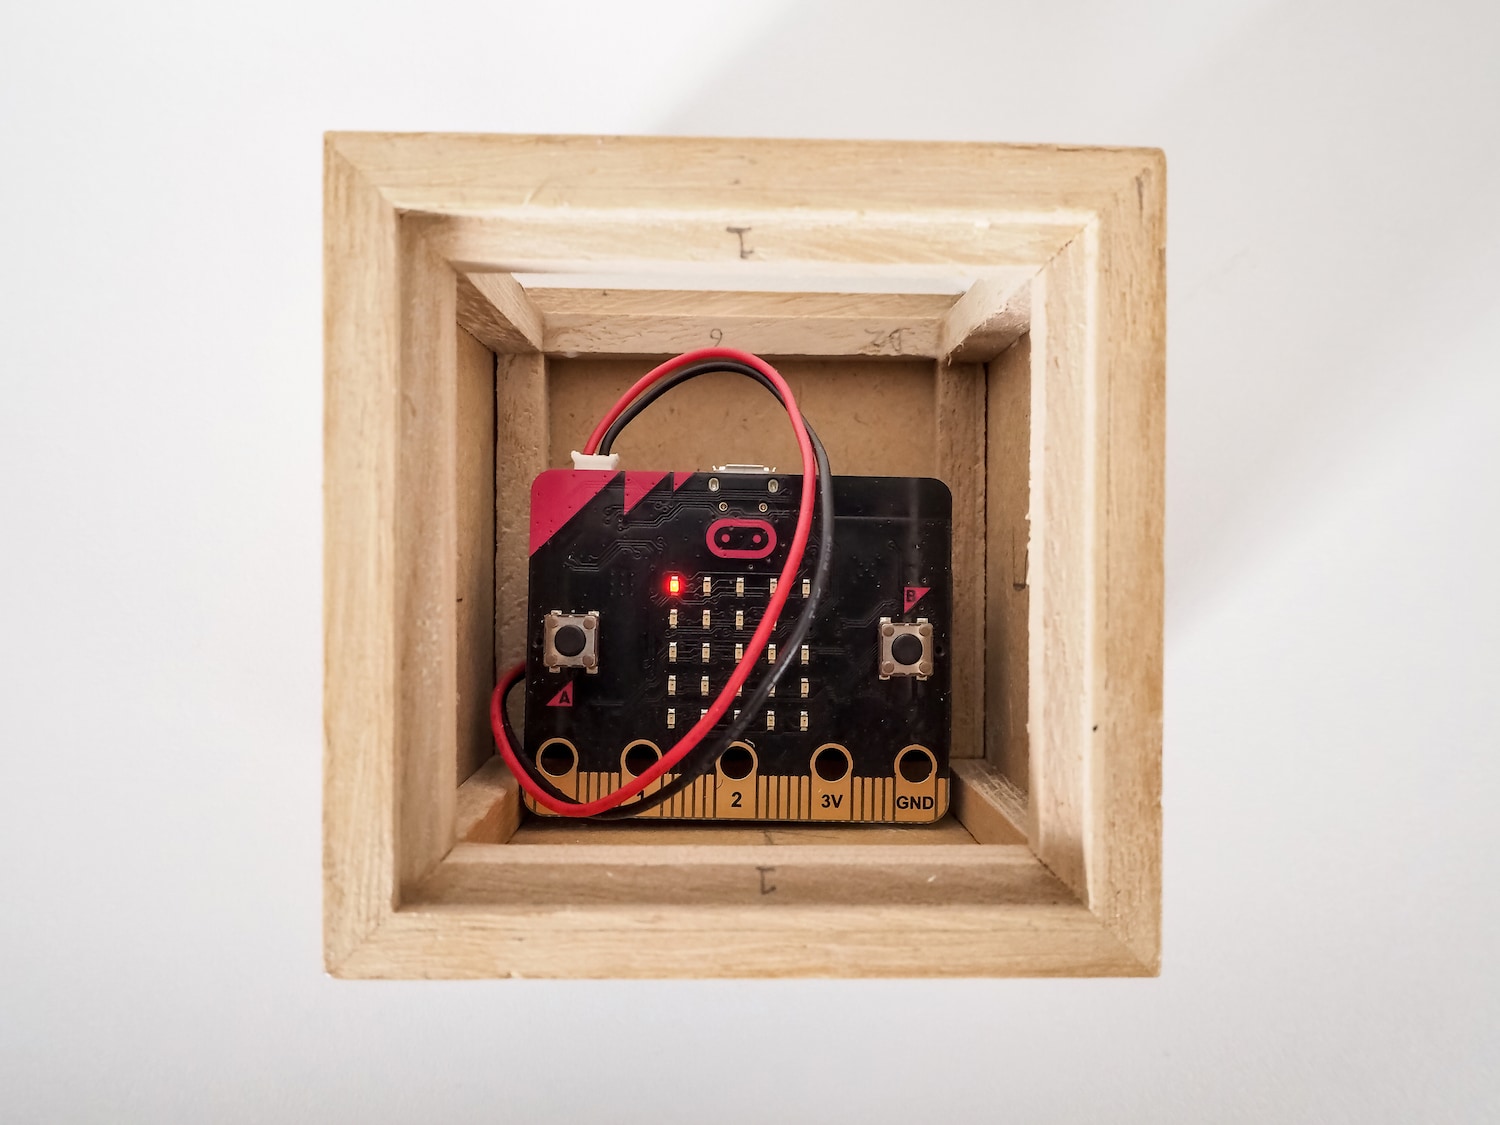 A photo of a micro-computer inside a wooden cube with a solid white background.